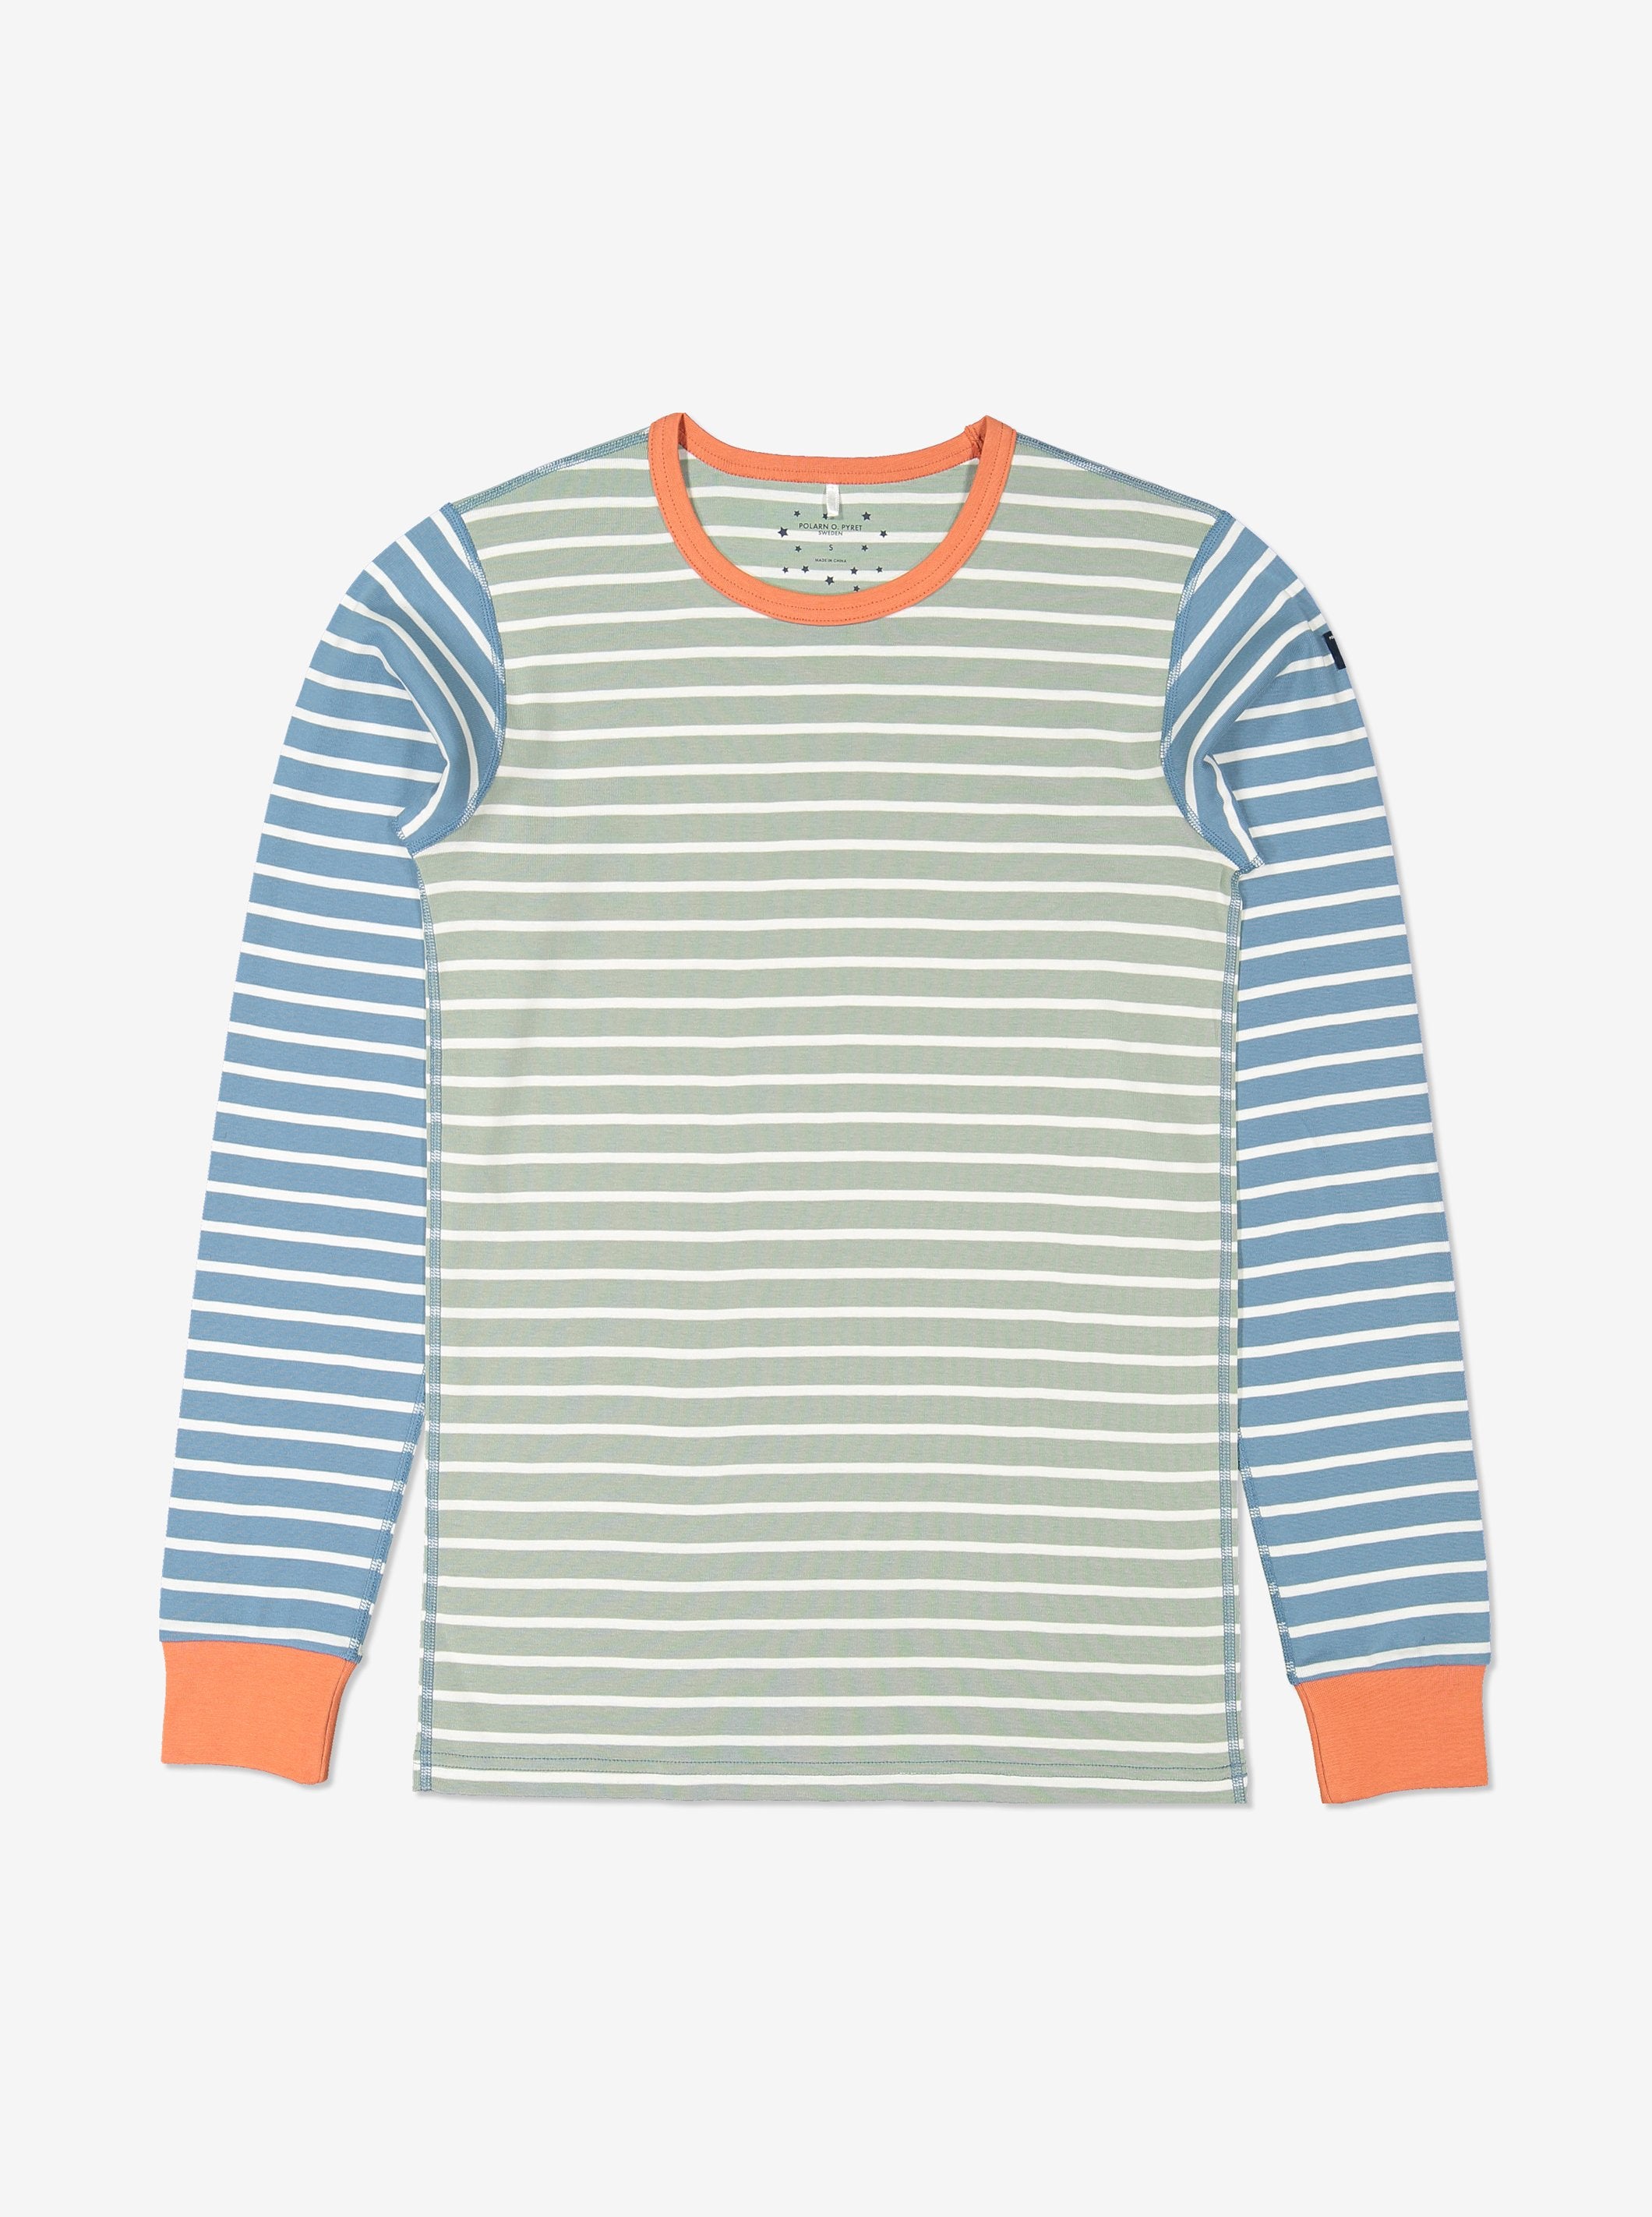 Striped Adult Top